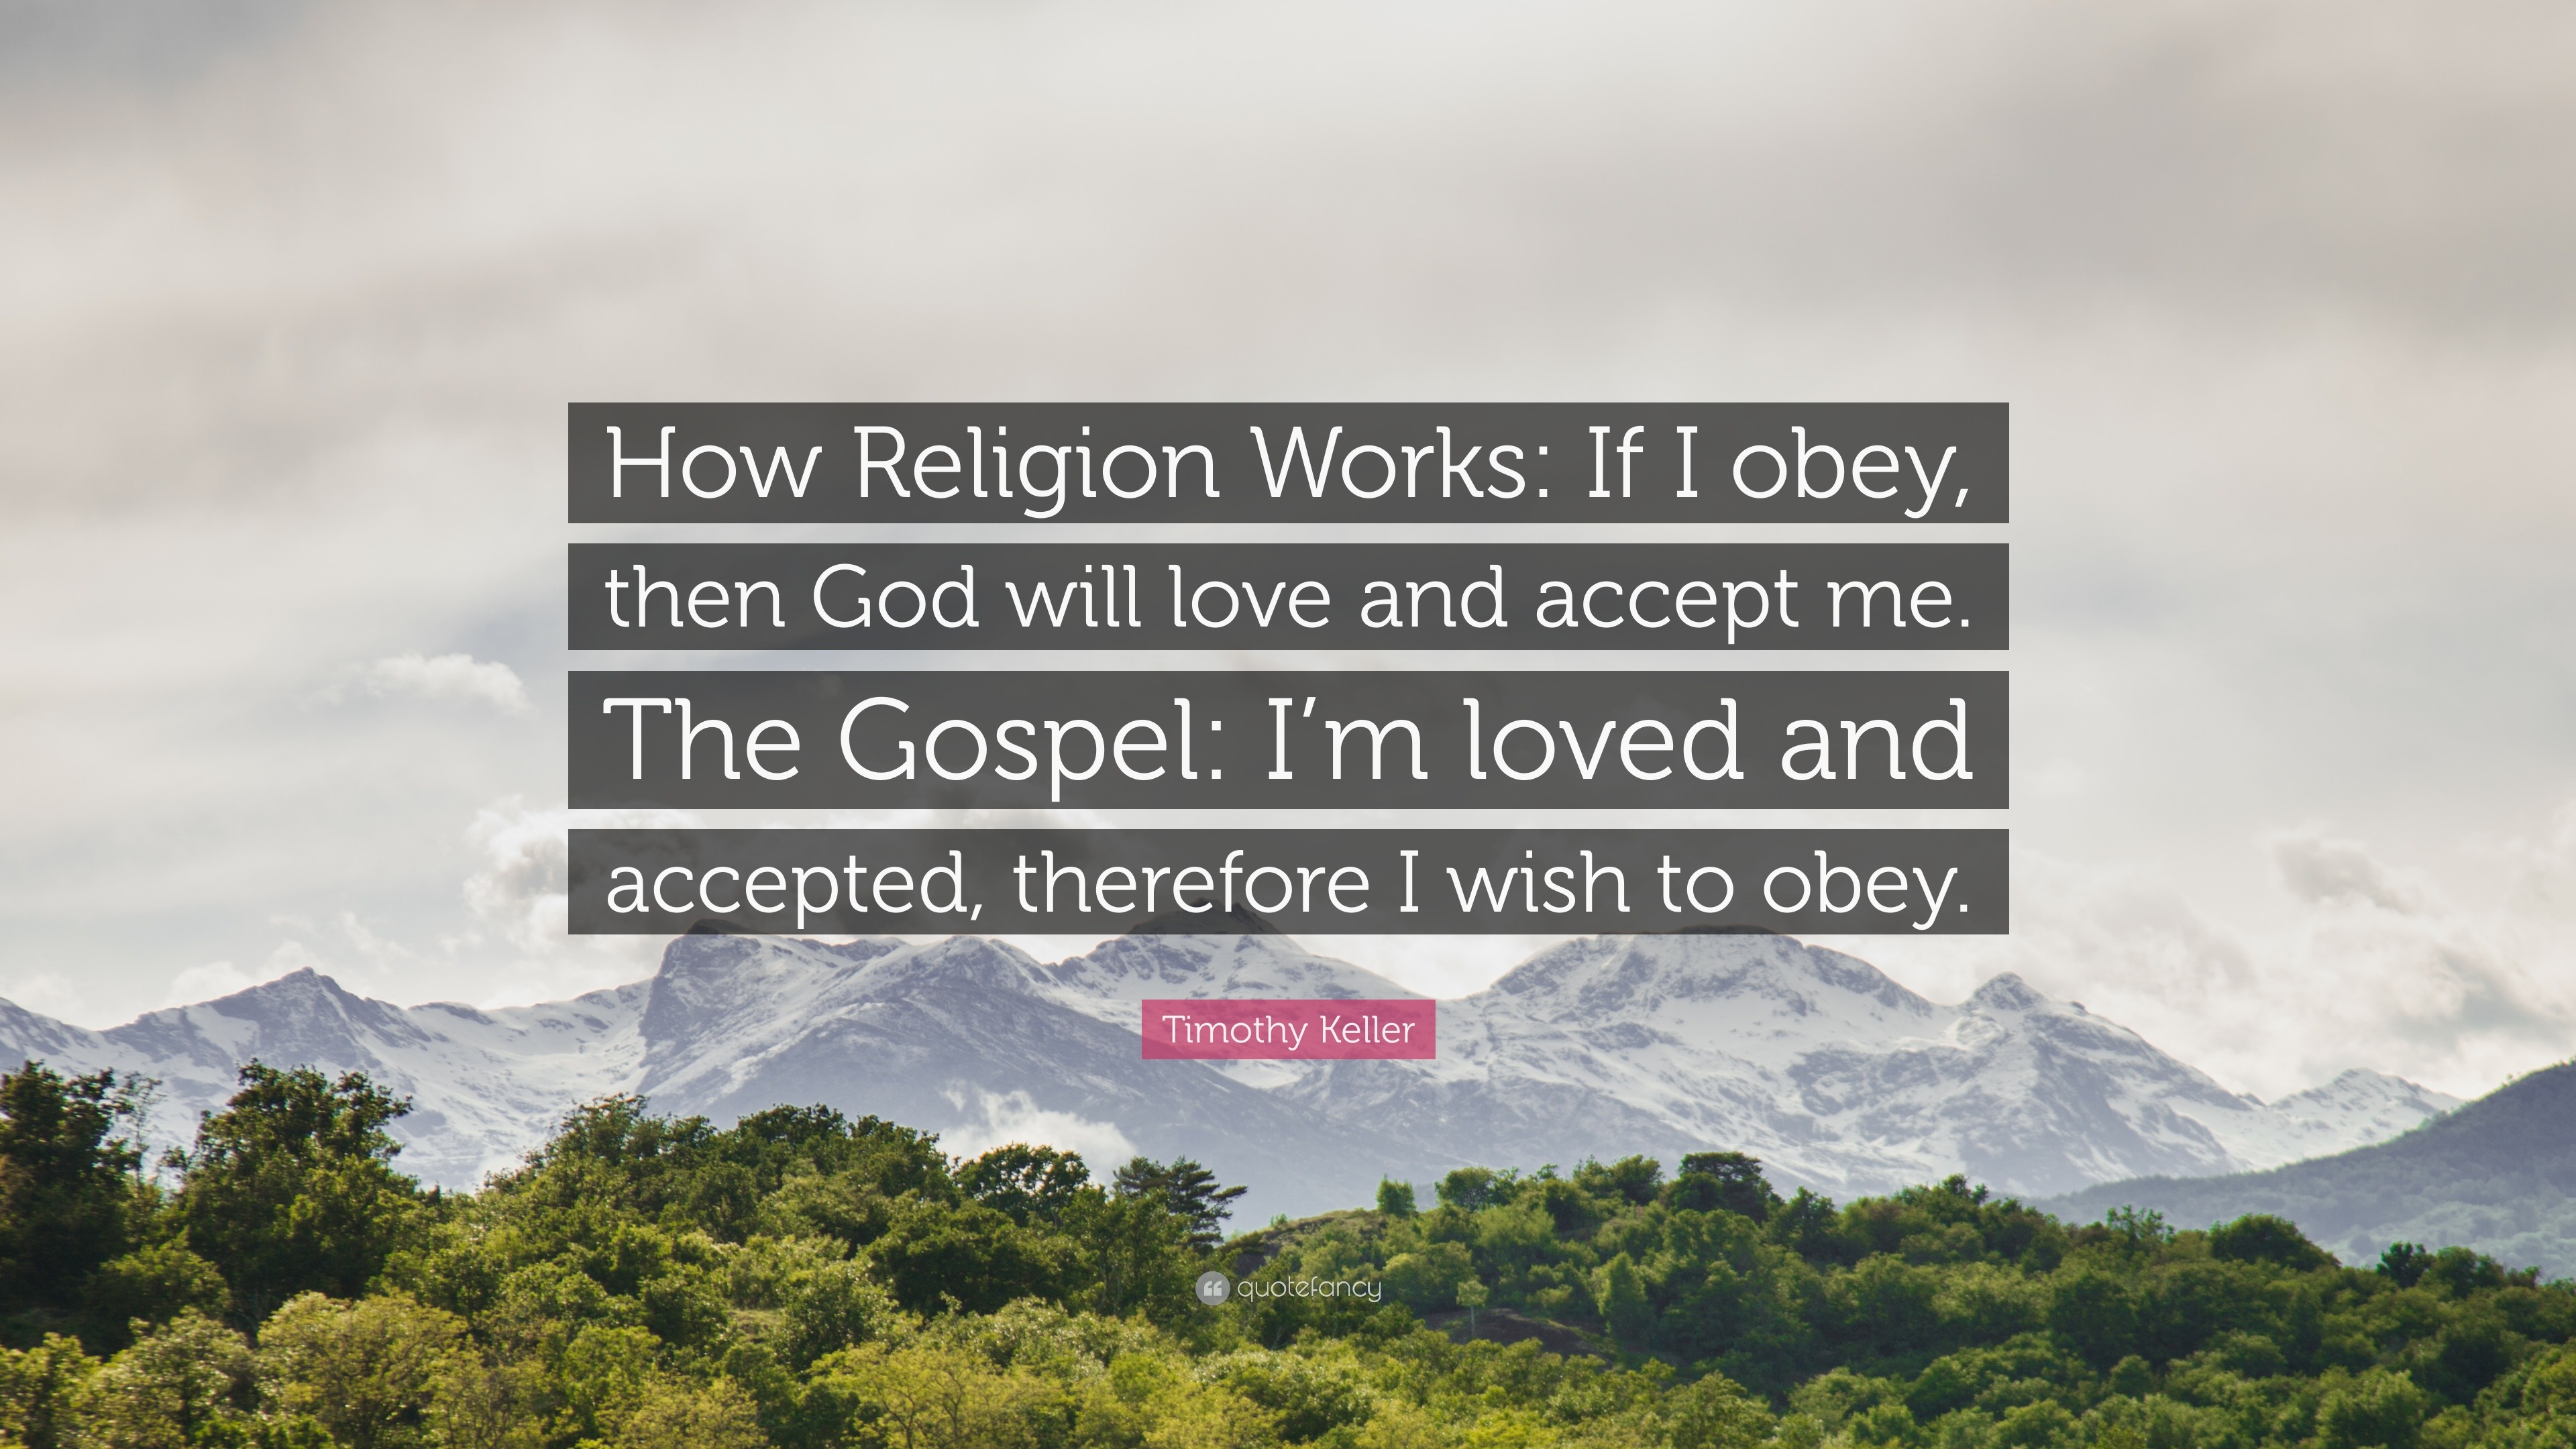 Timothy Keller Quote: “How Religion Works: If I obey, then God will love  and accept me. The Gospel: I'm loved and accepted, therefore I wish to...”